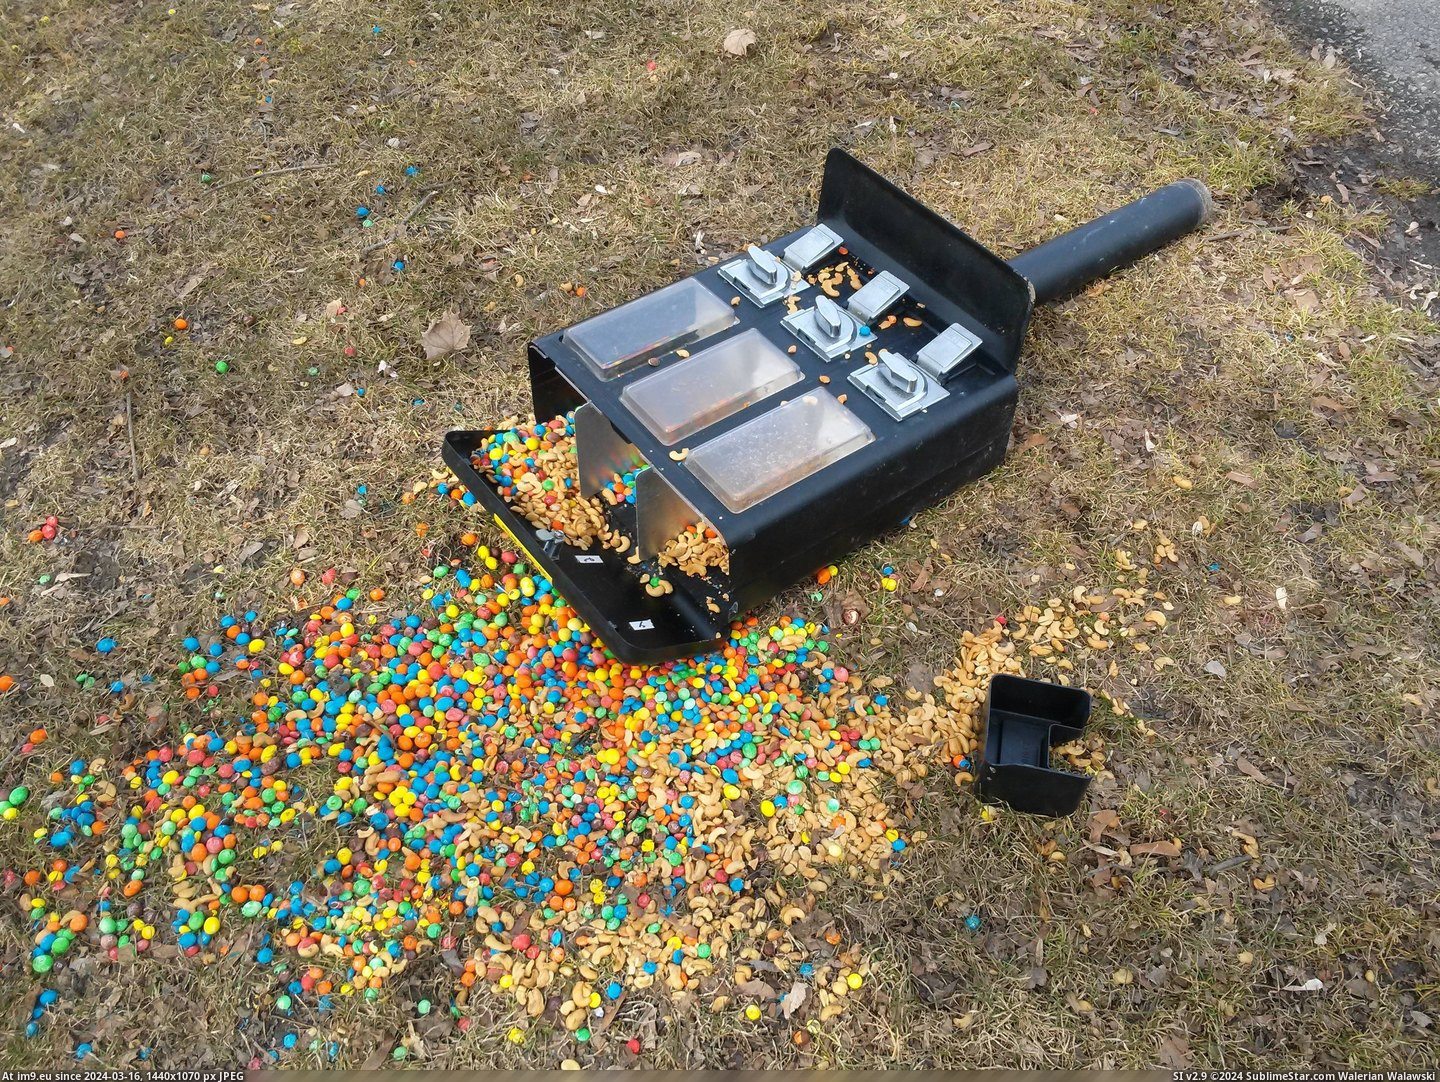 #Funny #Day #Years #Squirrels #Marquette #Park #Machine #Nuts [Funny] Years from now squirrels at Marquette Park will tell their grandchildren of the day the nuts-M&Ms machine collapsed. Pic. (Изображение из альбом My r/FUNNY favs))